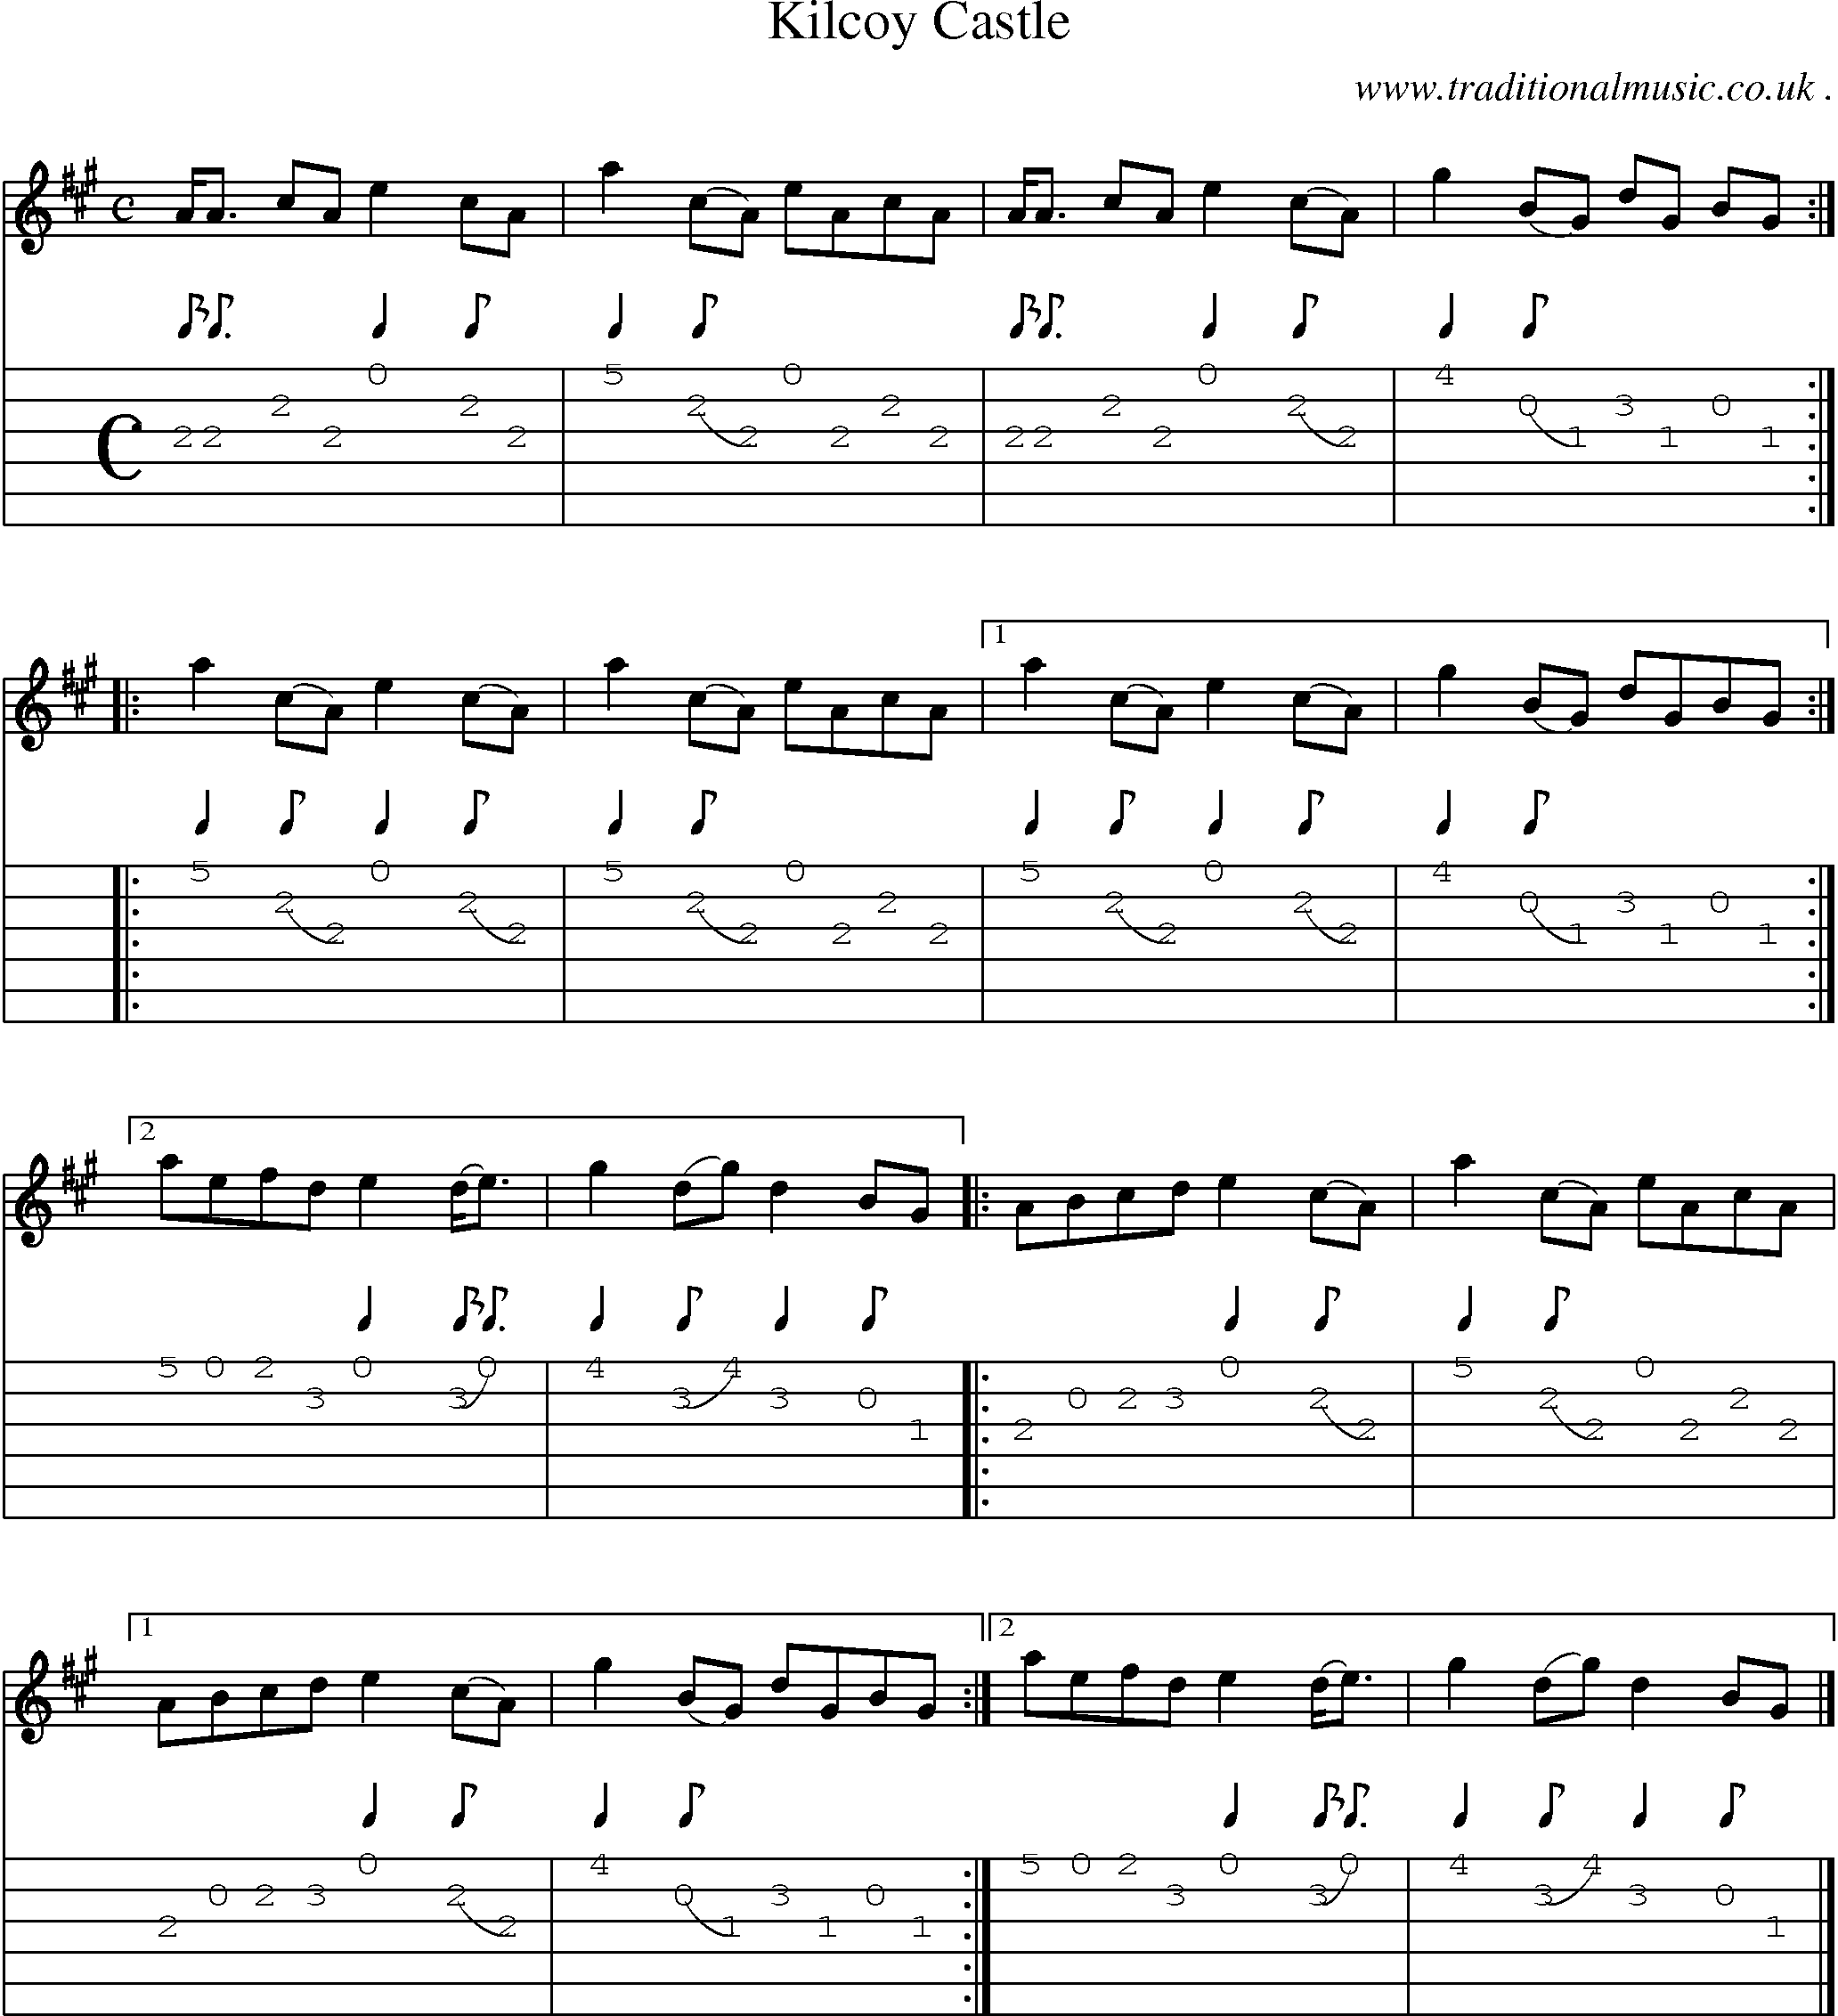 Sheet-music  score, Chords and Guitar Tabs for Kilcoy Castle